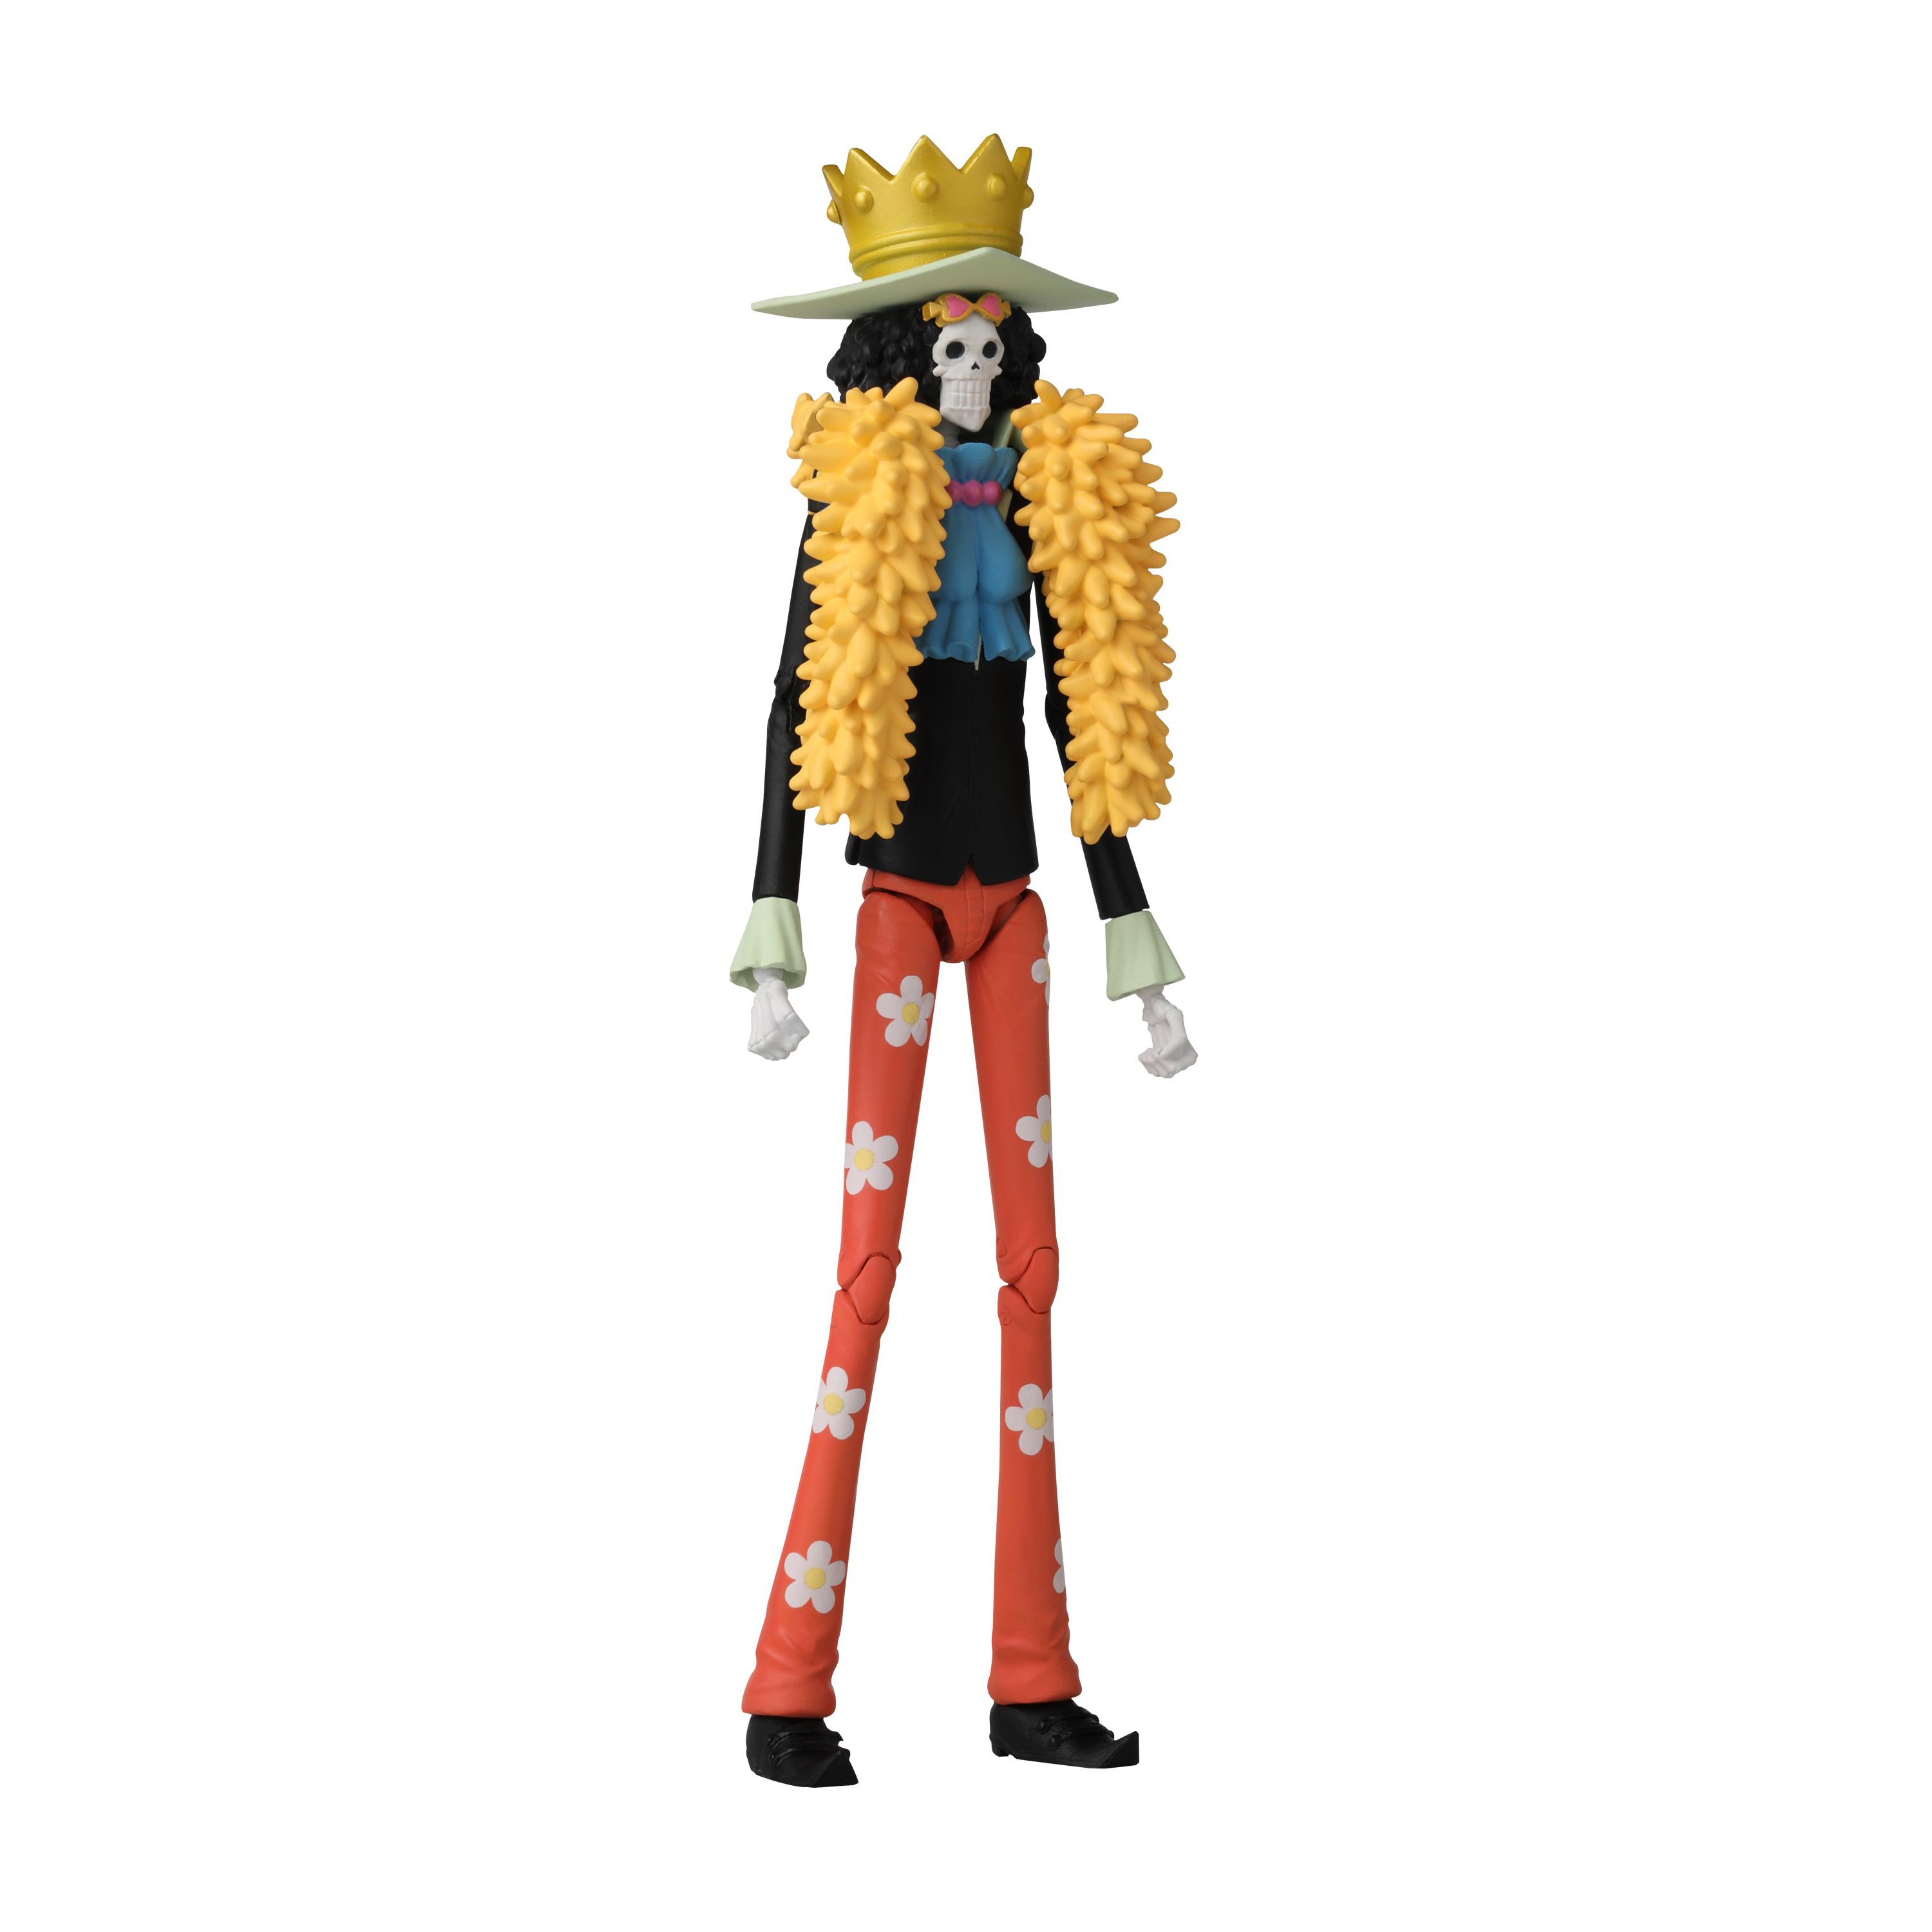 MAR238591 - ANIME HEROES ONE PIECE BROOK AF (Net) - Previews World